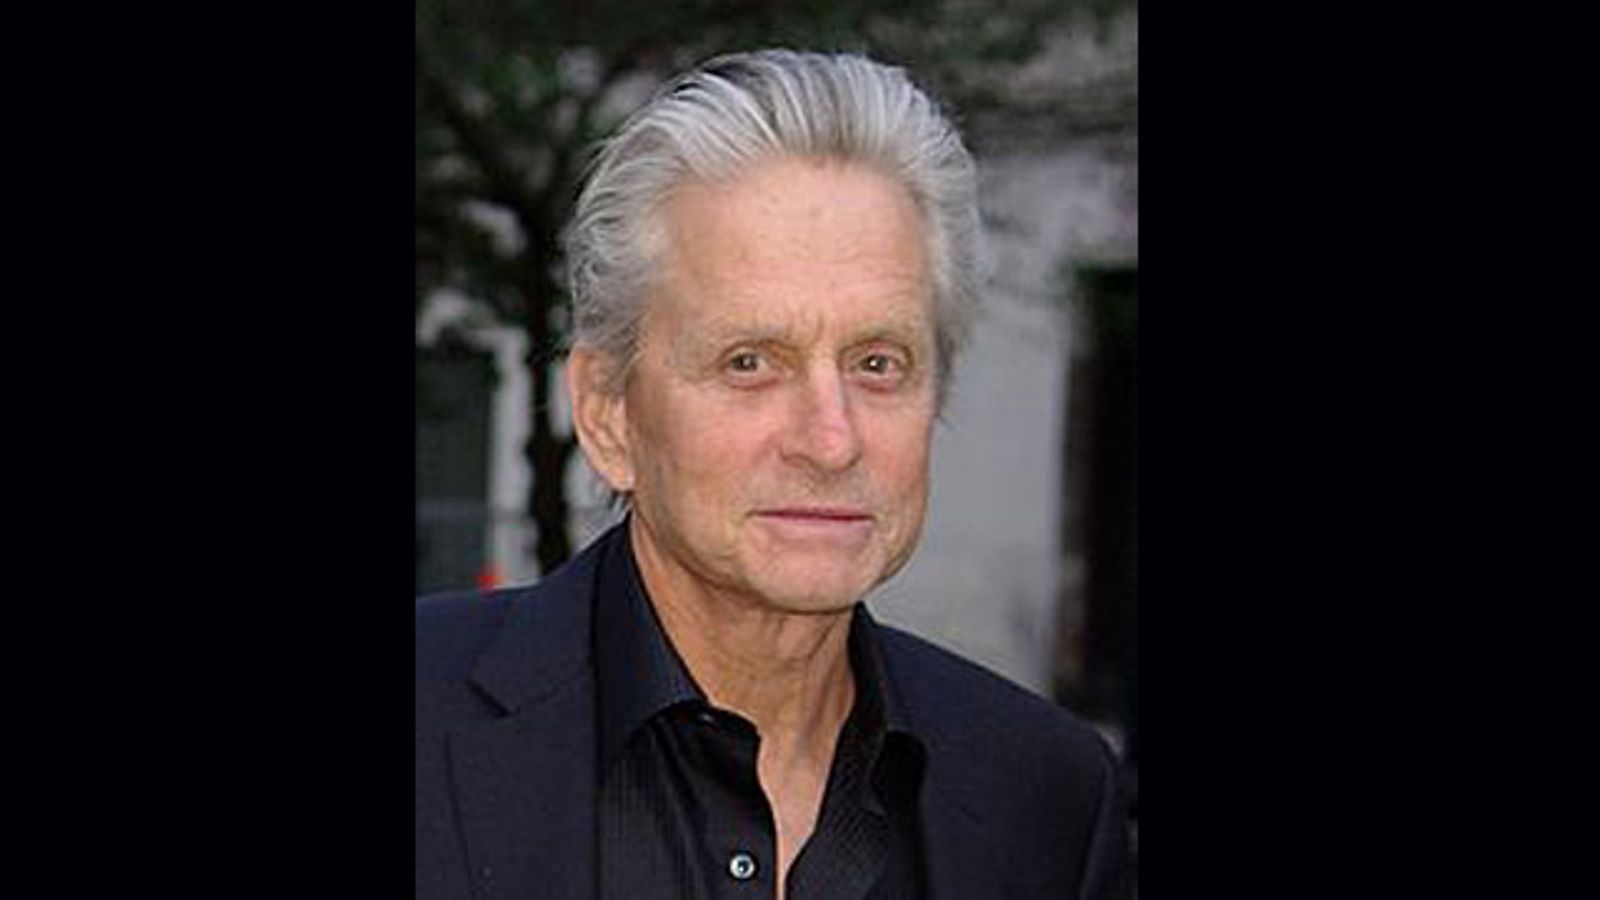 Cancer From Cunnilingus? Michael Douglas Claims It’s Real